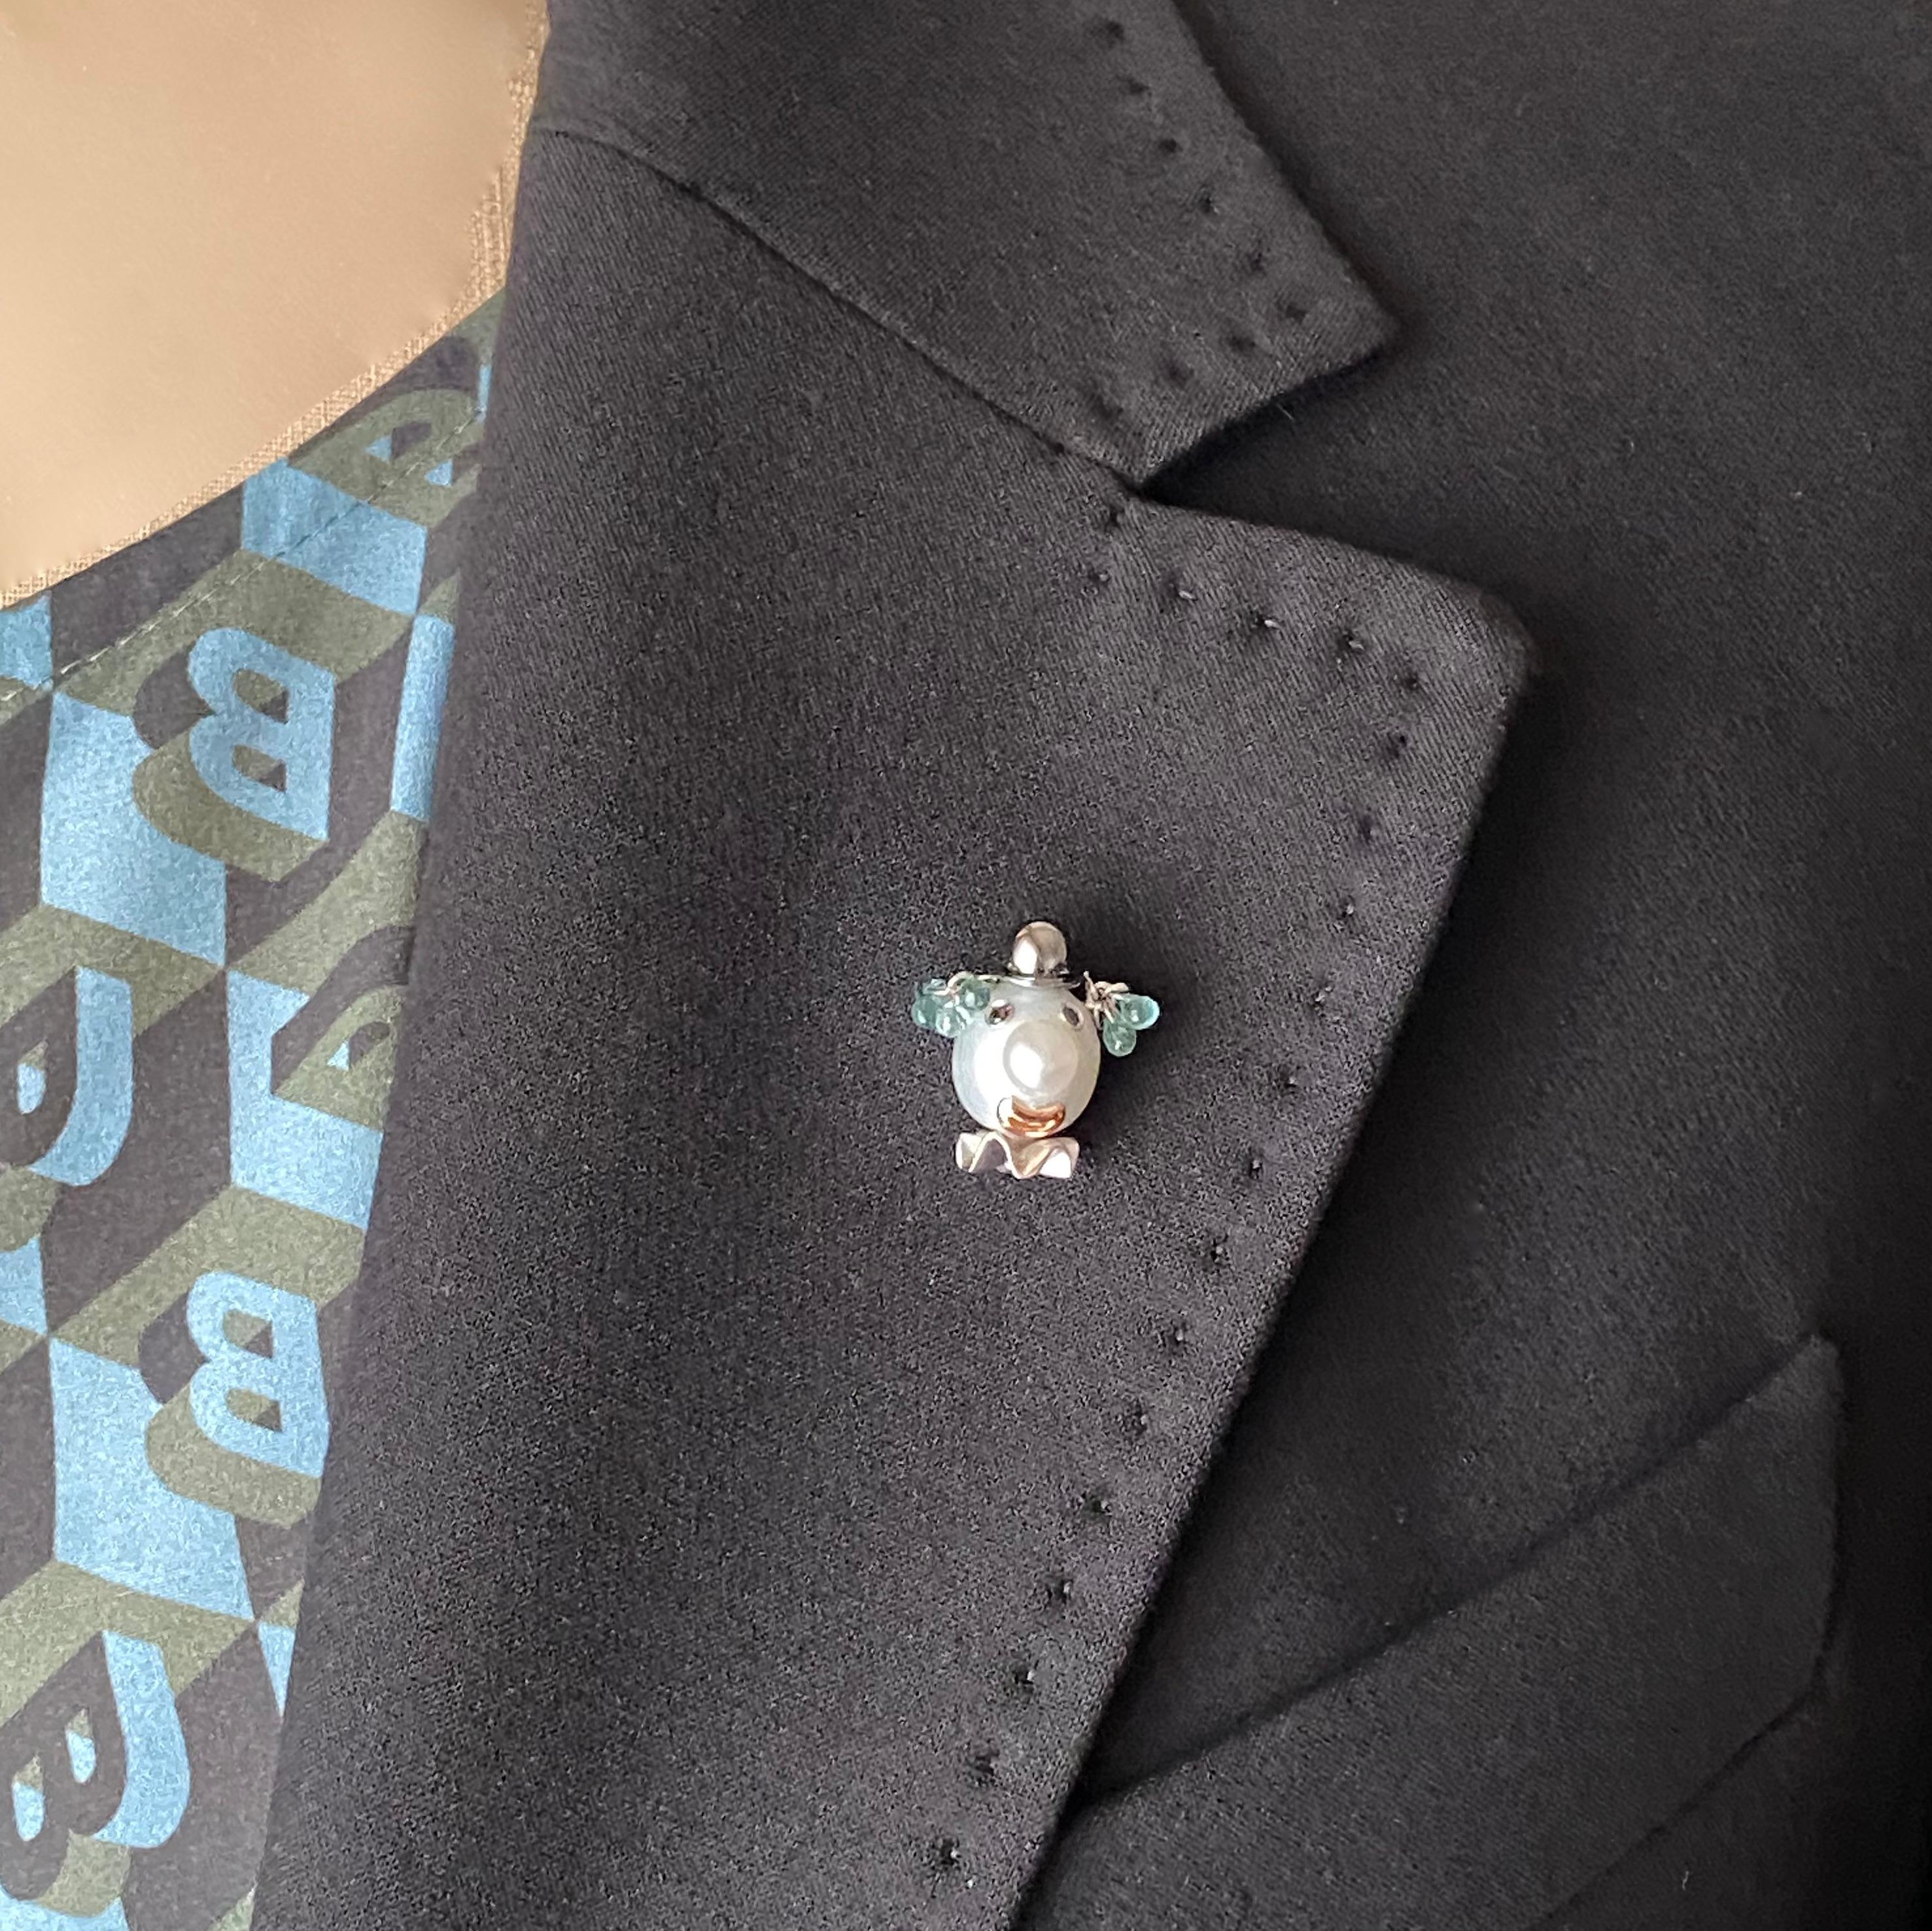 A unique bead to create a truly original and fun brooch.
The shape of this Australian pearl, which measures about 11x12 mm, inspired me to create a clown pin, given its prominence that reminded me of a bulbous nose, like that of clowns.

The eyes